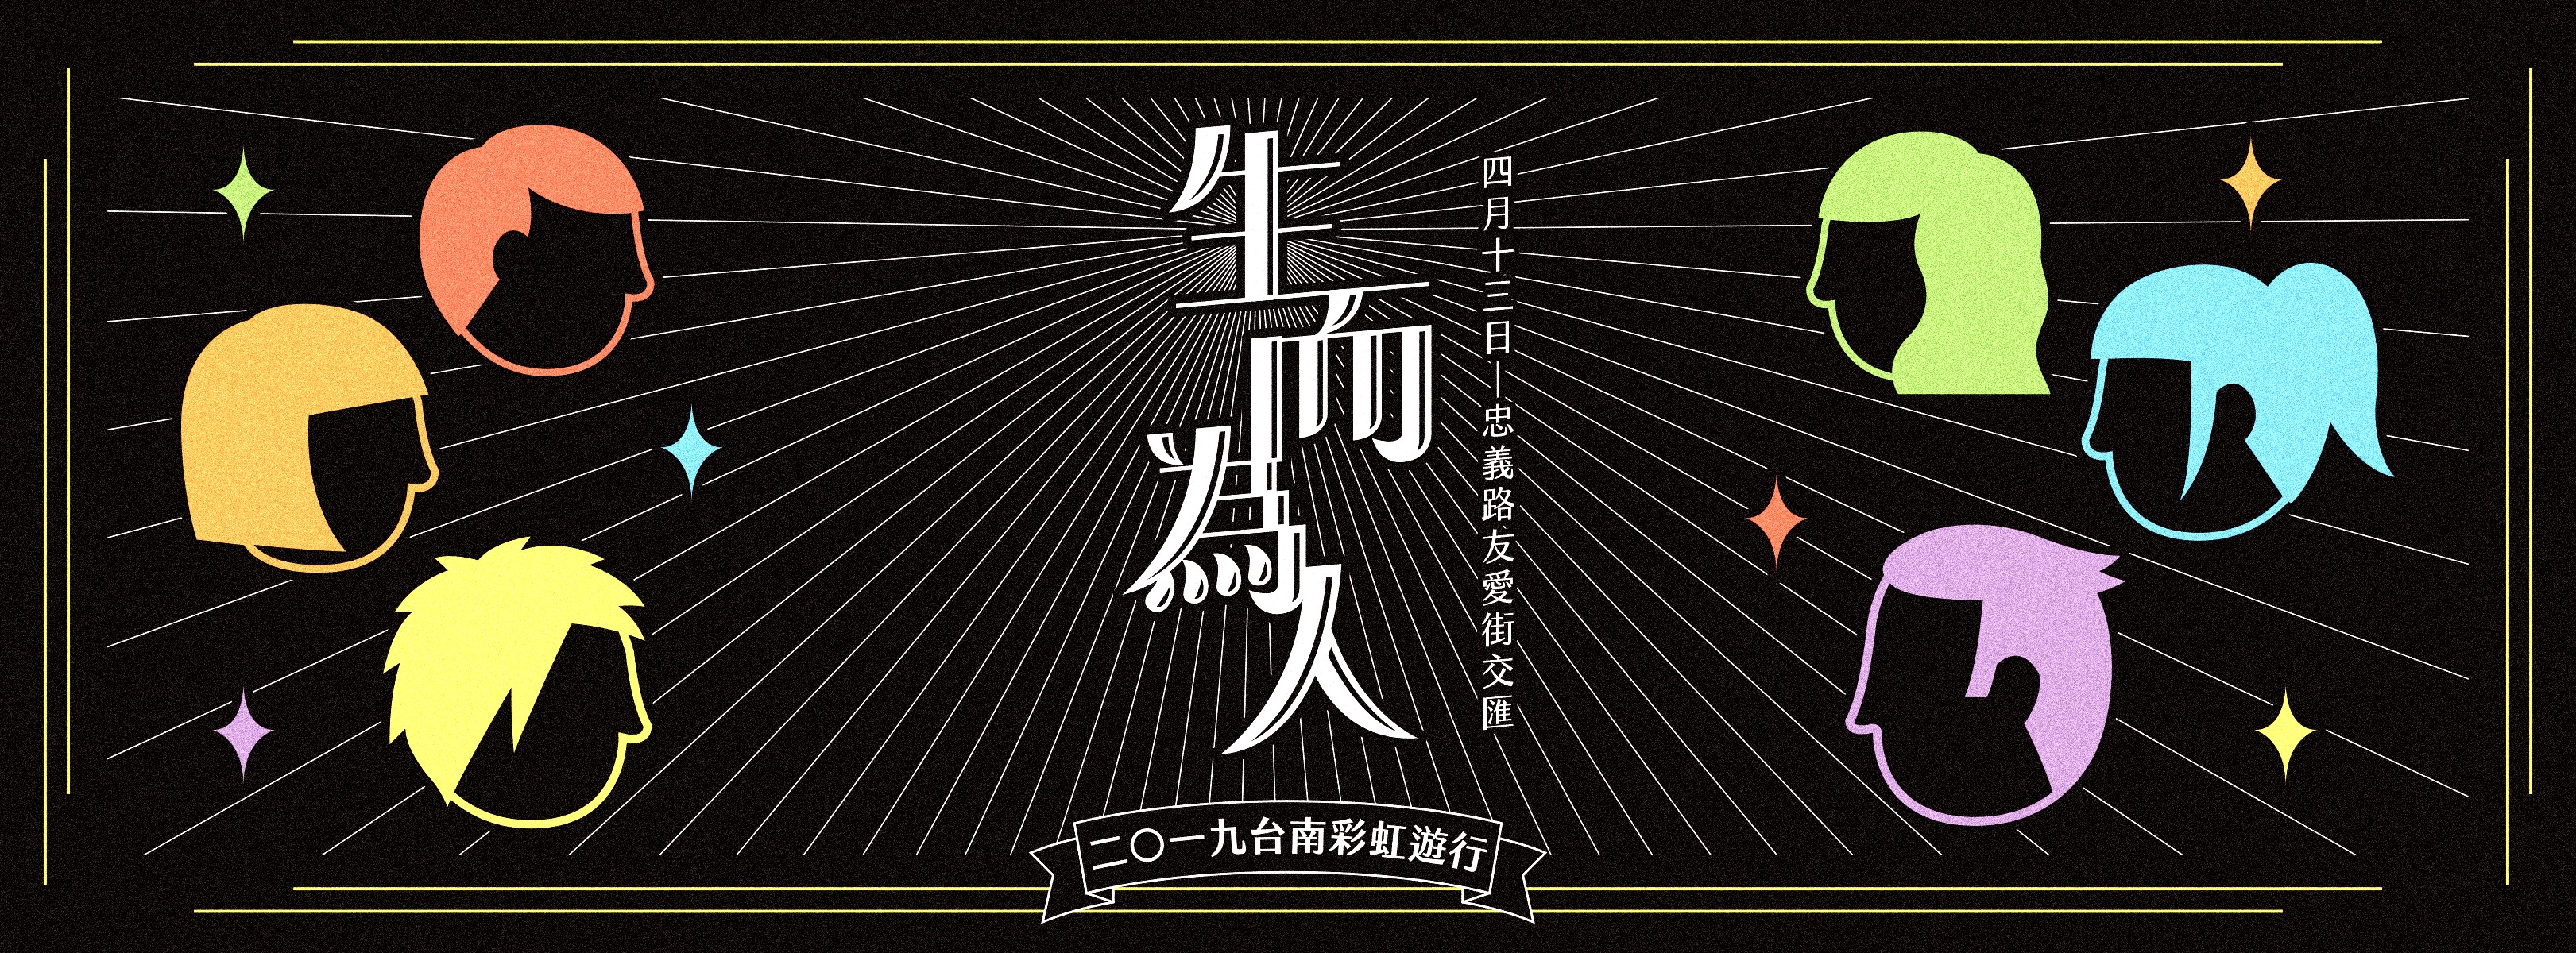 Read more about the article 2019 台南彩虹遊行懶人包 4/13 登場